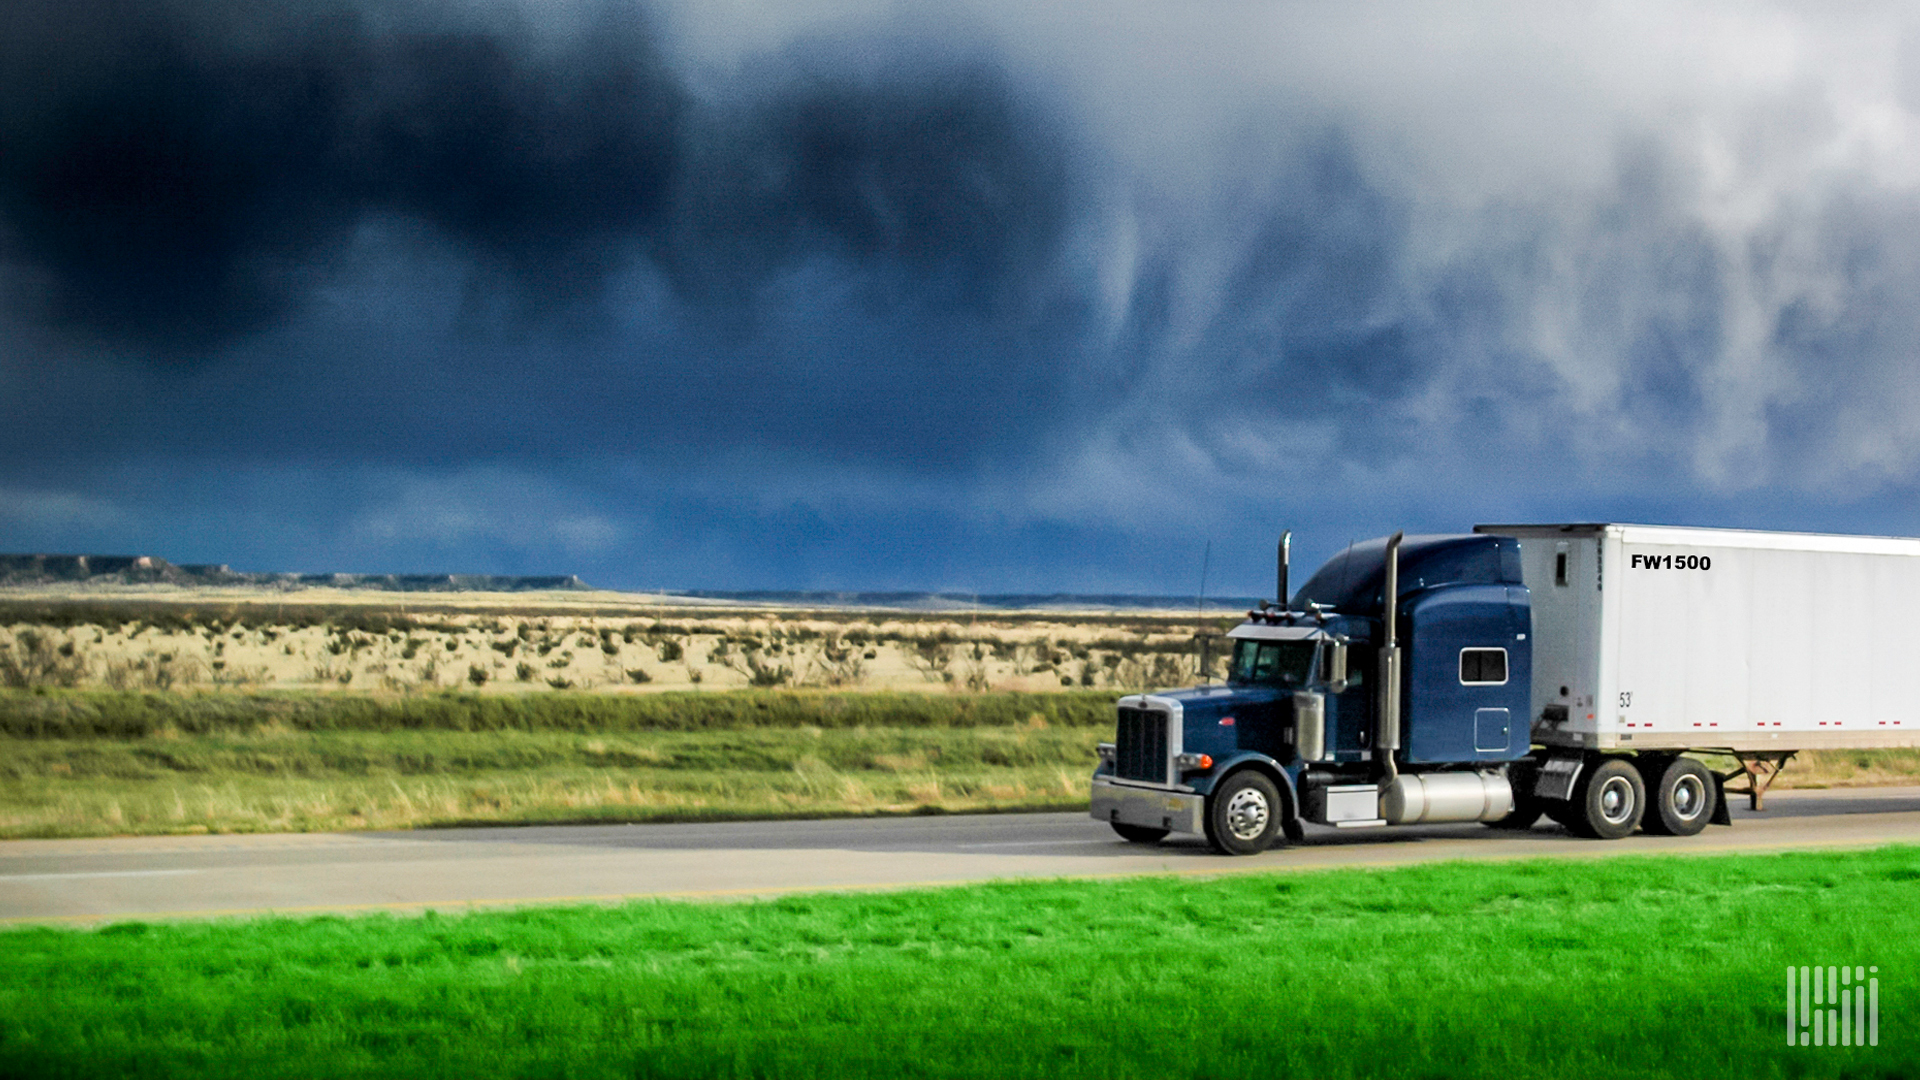 Tractor-trailer on a highway with dark storm cloud across the sky.